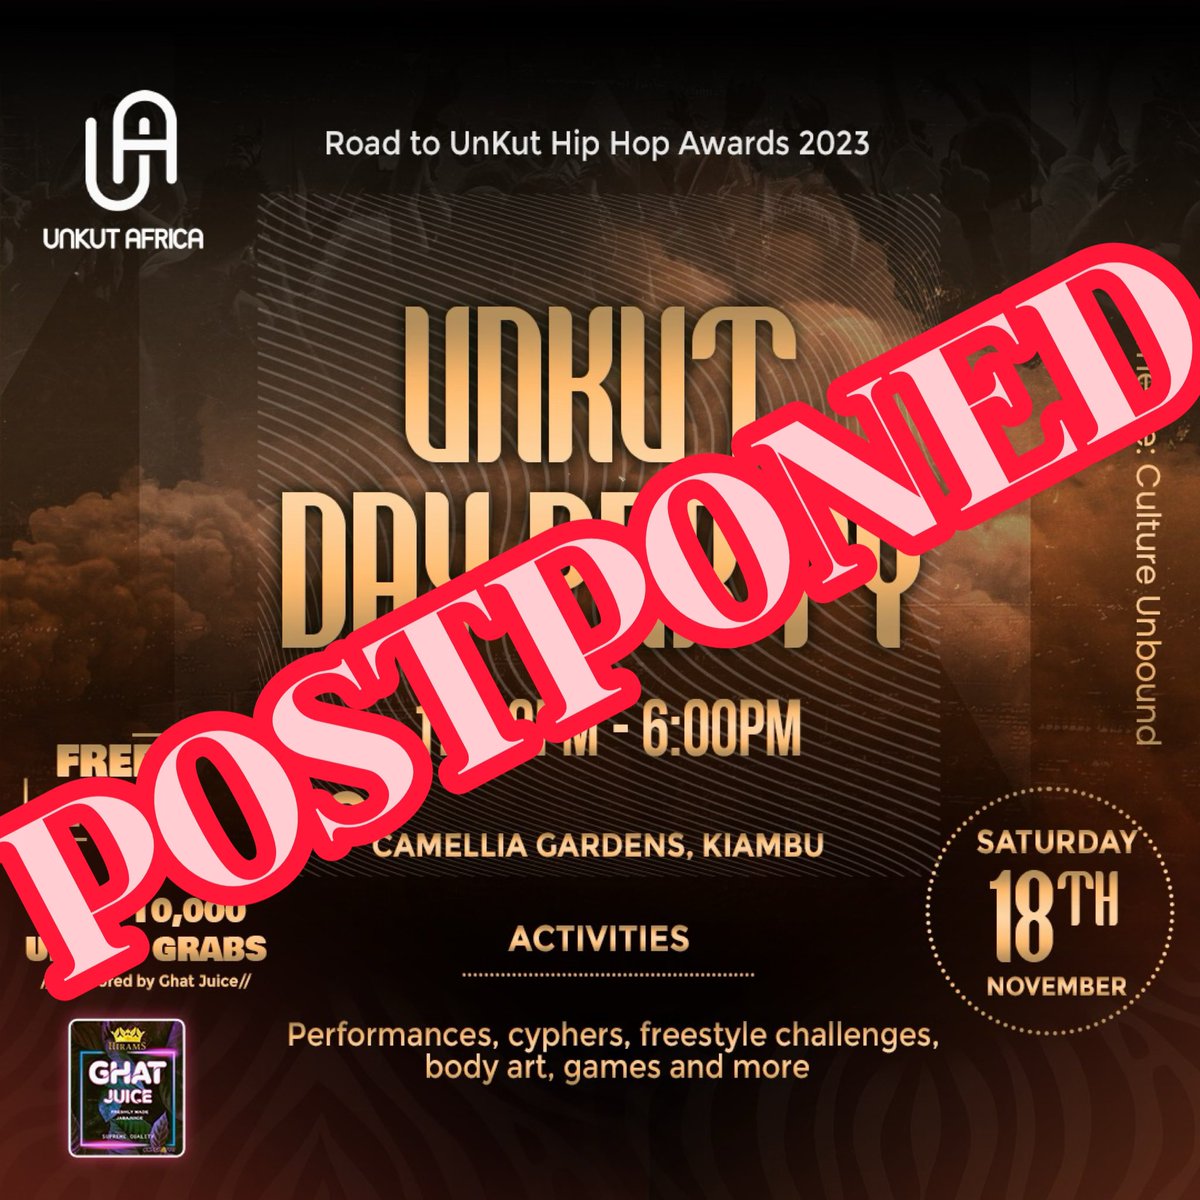 Unforeseen circumstances force us to postpone tomorrow’s #UnKutDayParty at Camellia Gardens. We’ll definitely be in touch with any developments concerning hosting a party on those ends. Apologies to everyone who was looking forward to this. @hiramsghatjuice @unkutafrica